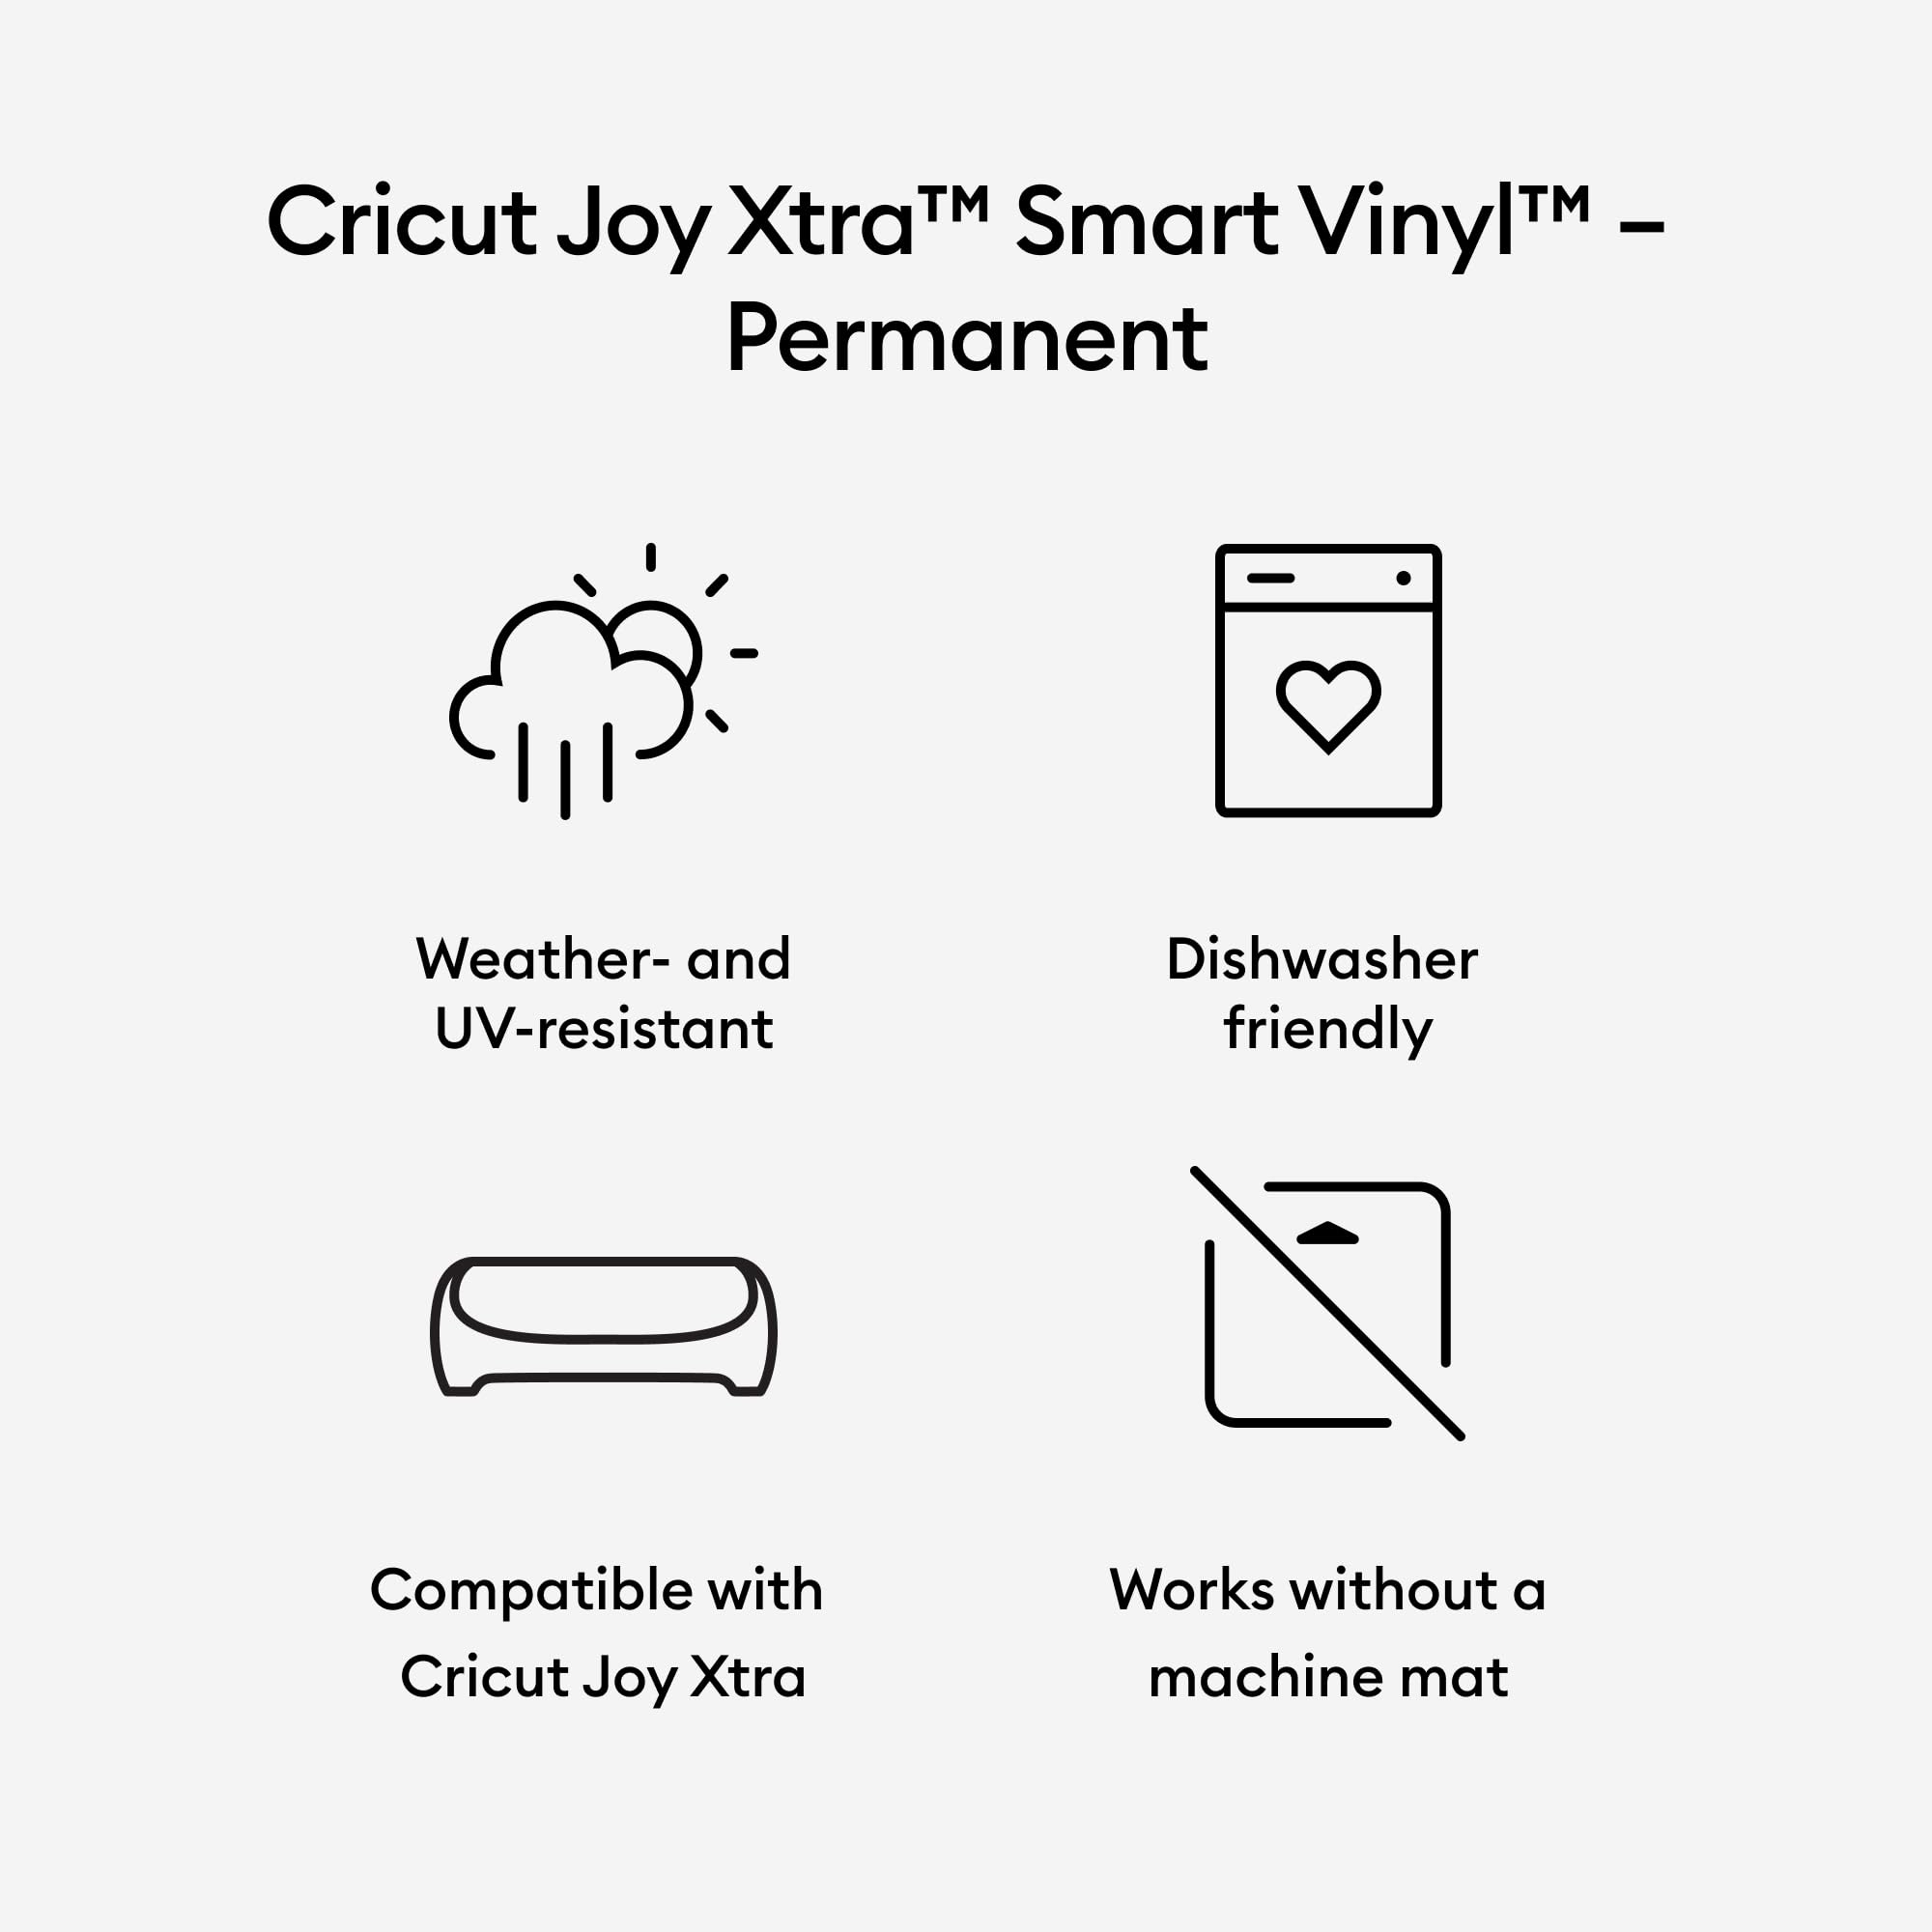 Cricut Joy Xtra Matte Metallic Smart Permanent Vinyl (9.5in x 3ft), Recommended for Indoor/Outdoor DIY Crafts, Decor Projects, Decals & More, Dishwasher Friendly, Gold